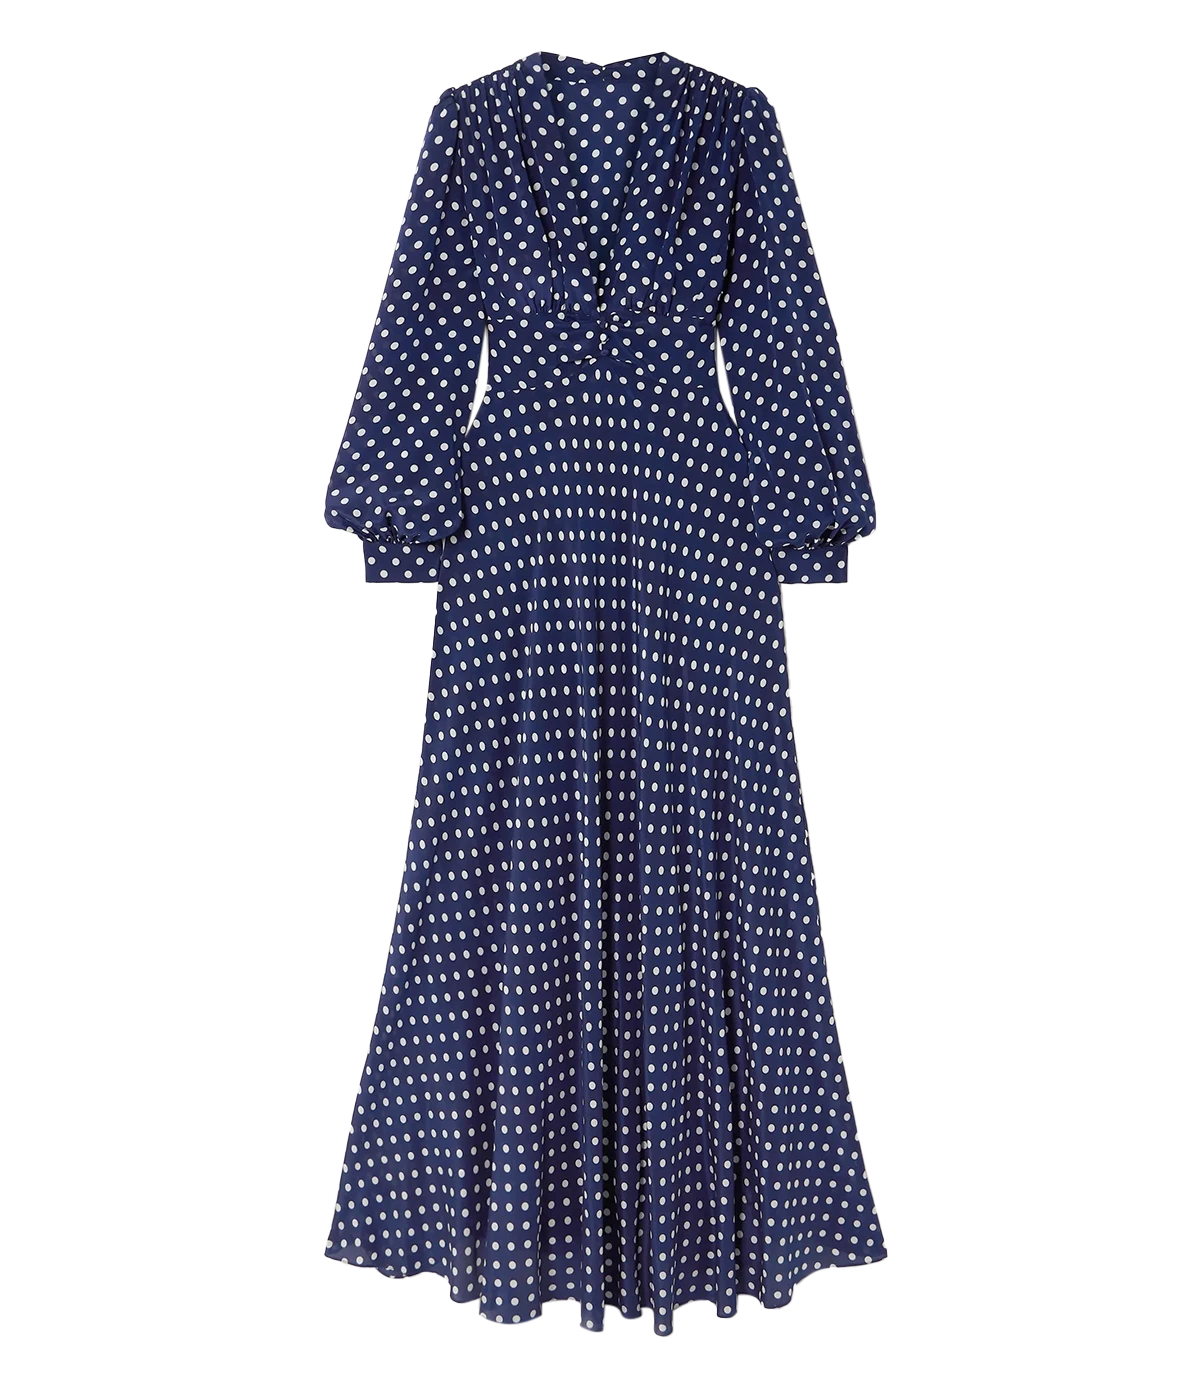 Lightweight, non-stretchy fabric navy and white polka dot silk dress. Made of 100 percent silk Crepe de Chine. Perfect for any occasion from long lunches to black tie events, wear this RIXO dress all holiday season. 